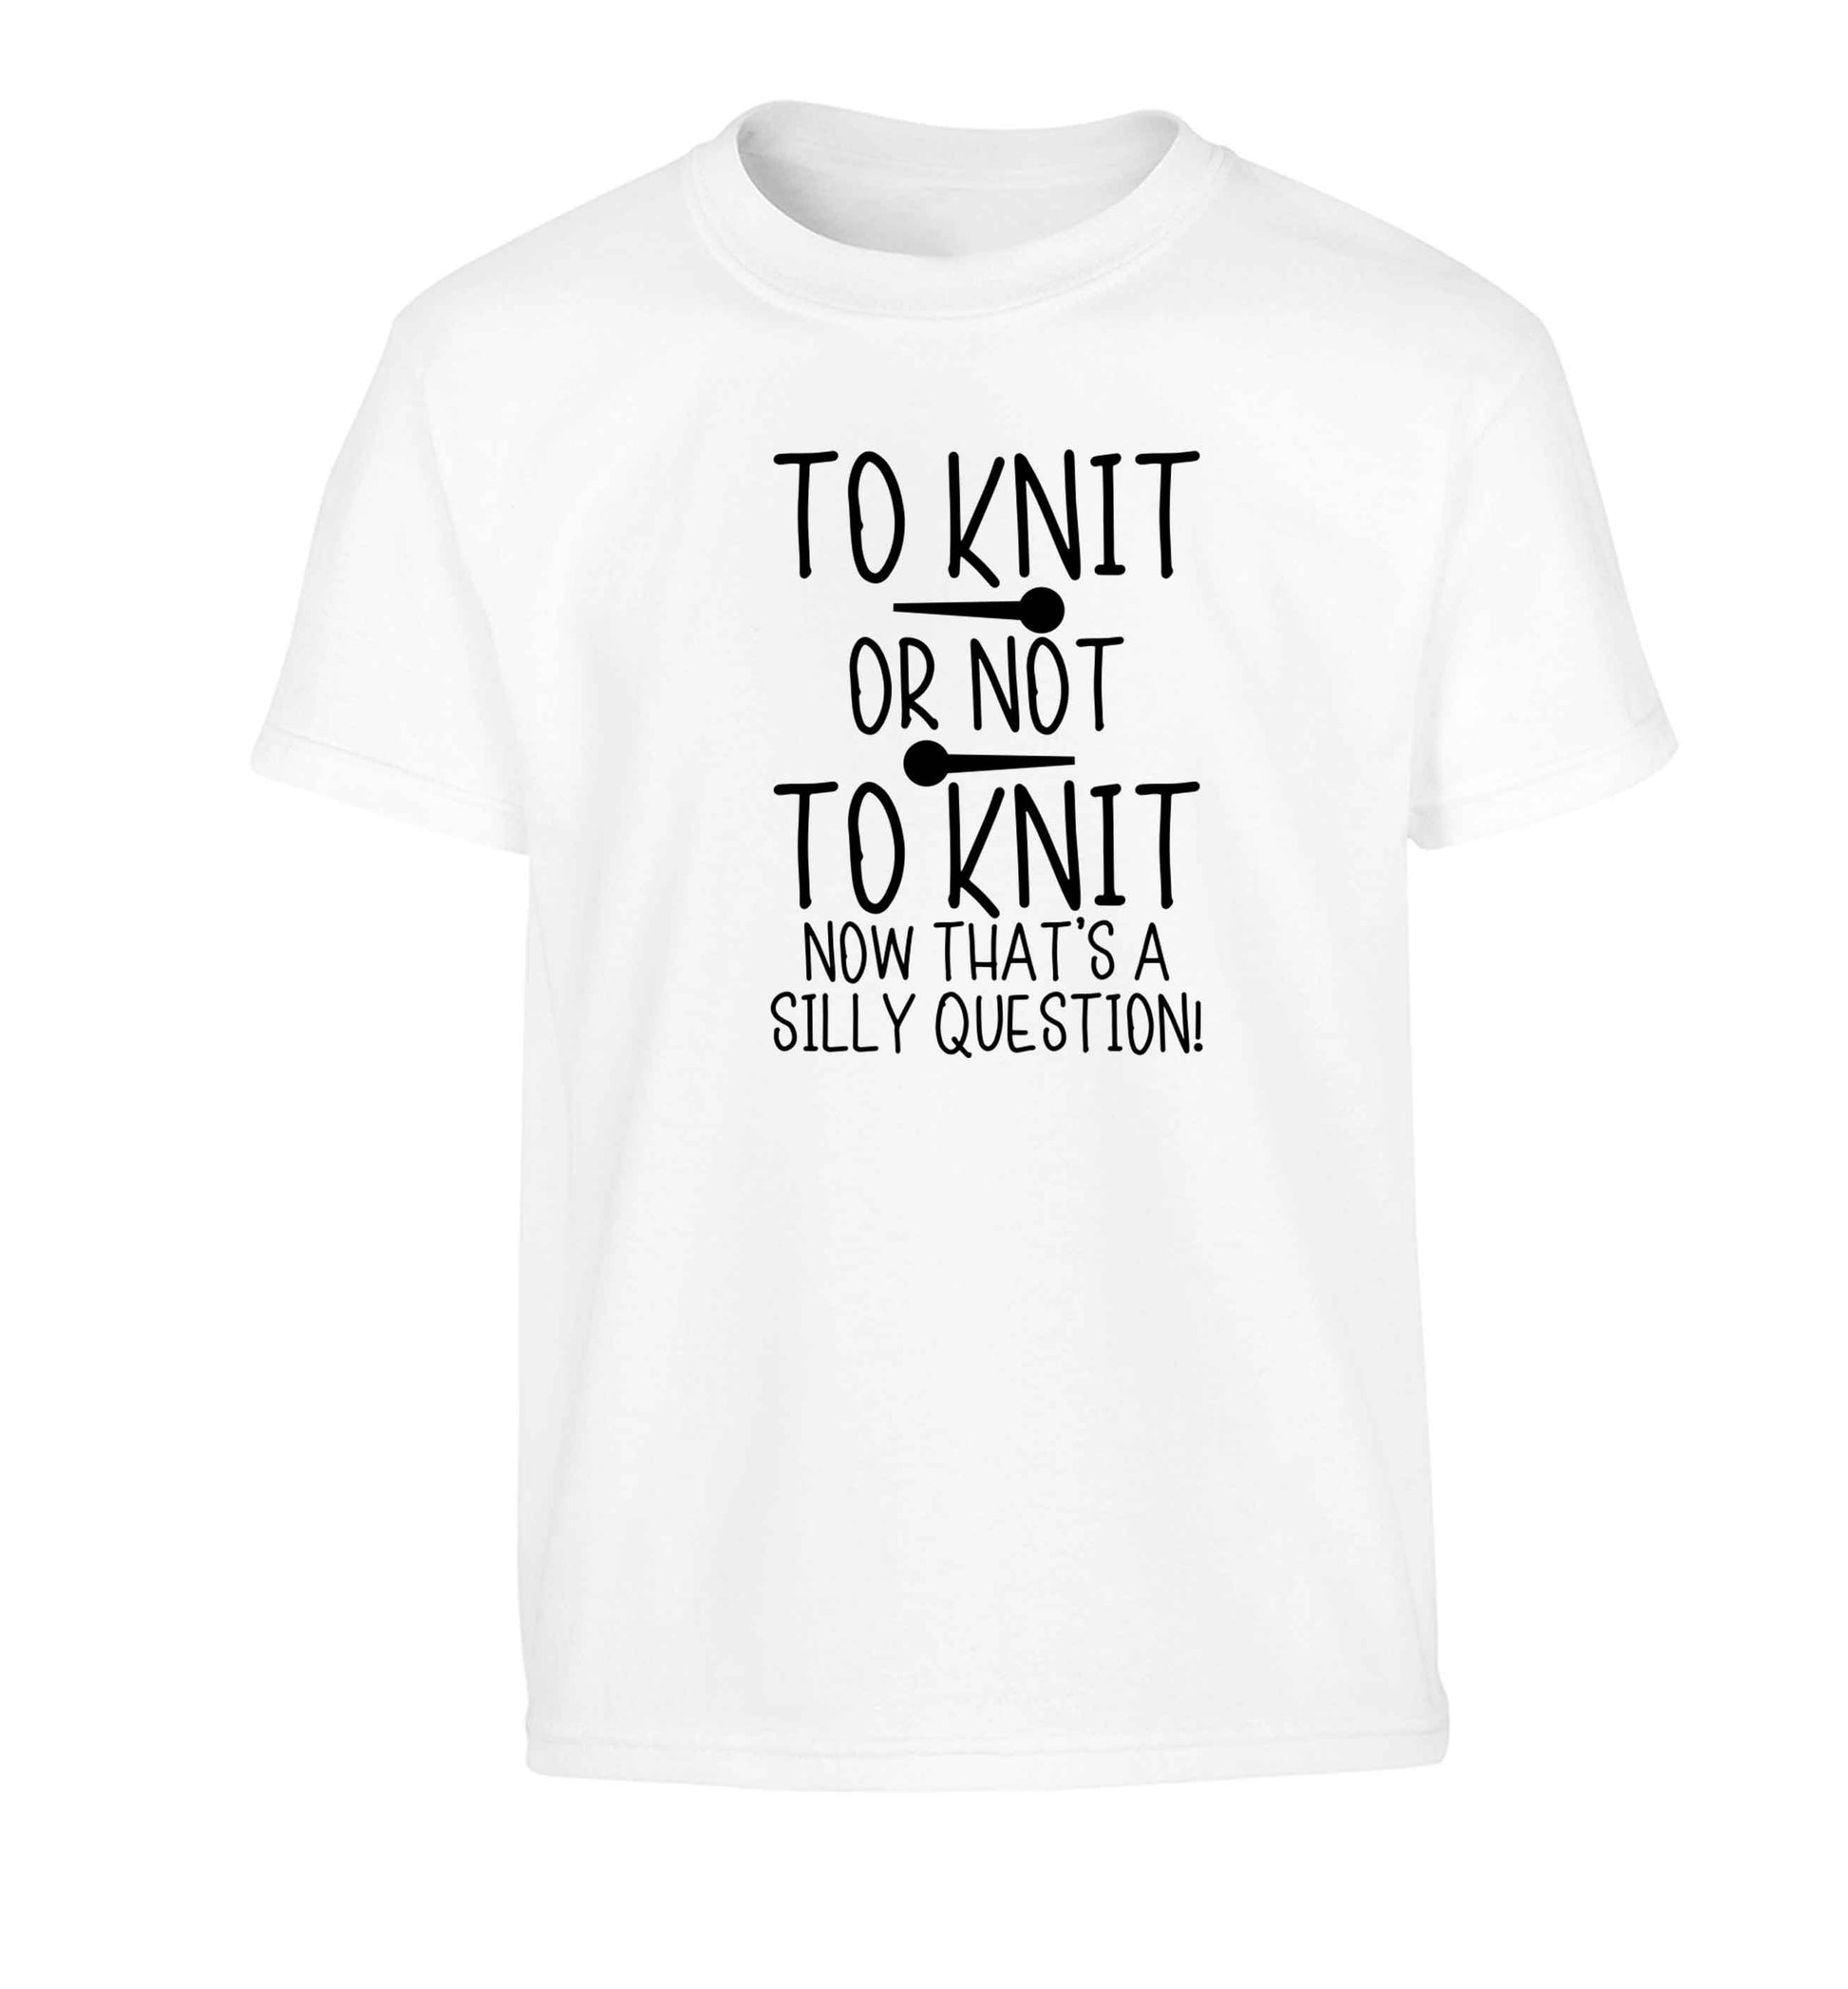 To knit or not to knit now that's a silly question Children's white Tshirt 12-13 Years